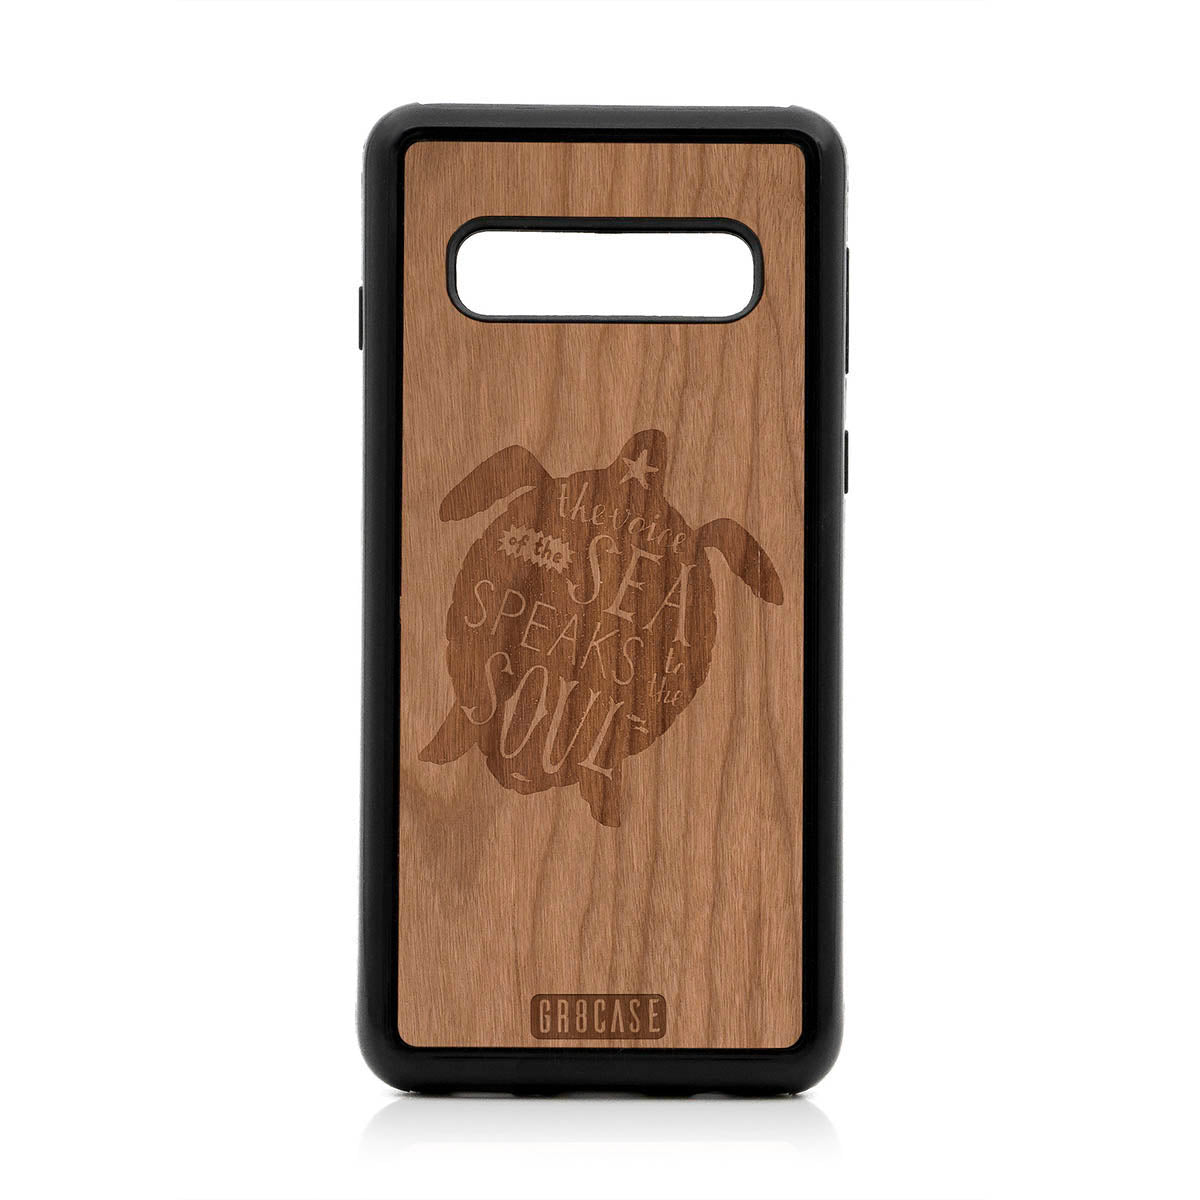 The Voice Of The Sea Speaks To The Soul (Turtle) Design Wood Case For Samsung Galaxy S10